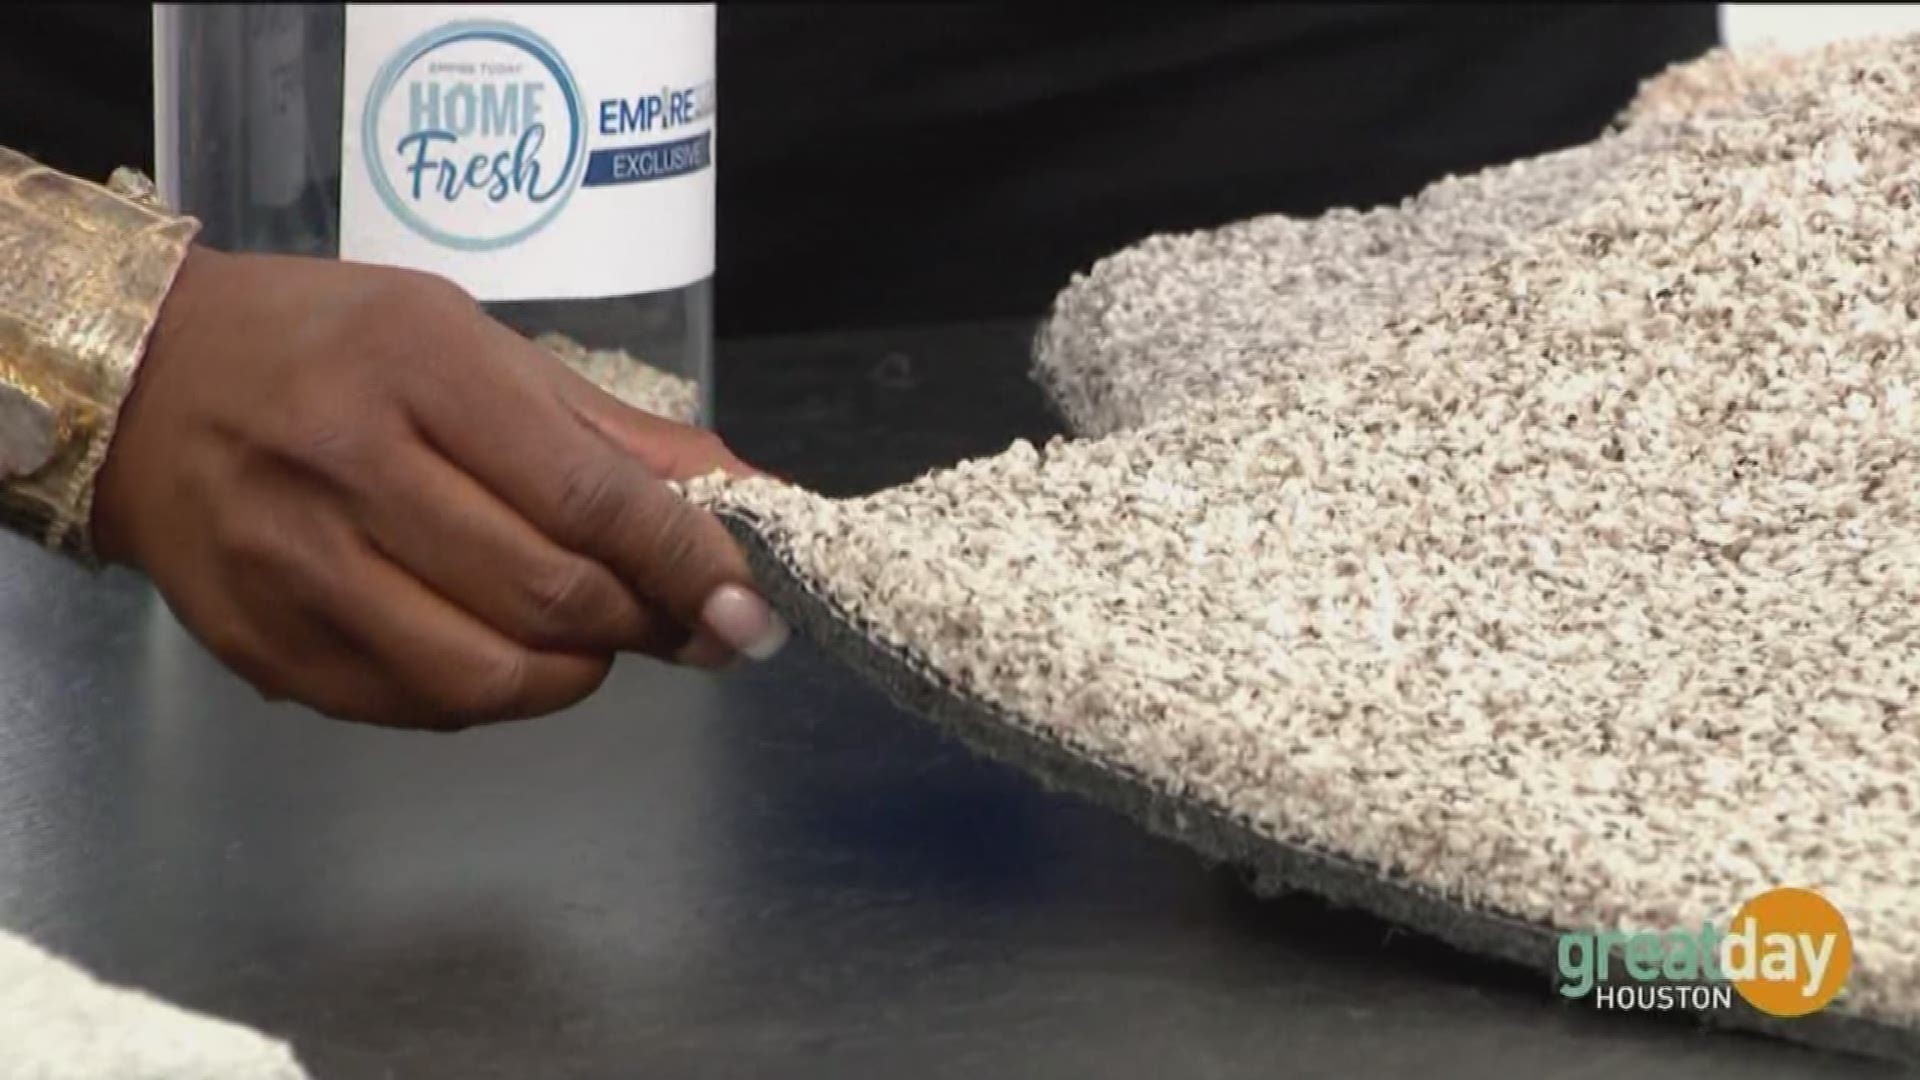 The Empire Man Ryan Salzwedel performed a side by side scent test with Great Day Houston host Deborah Duncan. They compared traditional carpet to Empire Today's exclusive HOME Fresh carpet. 